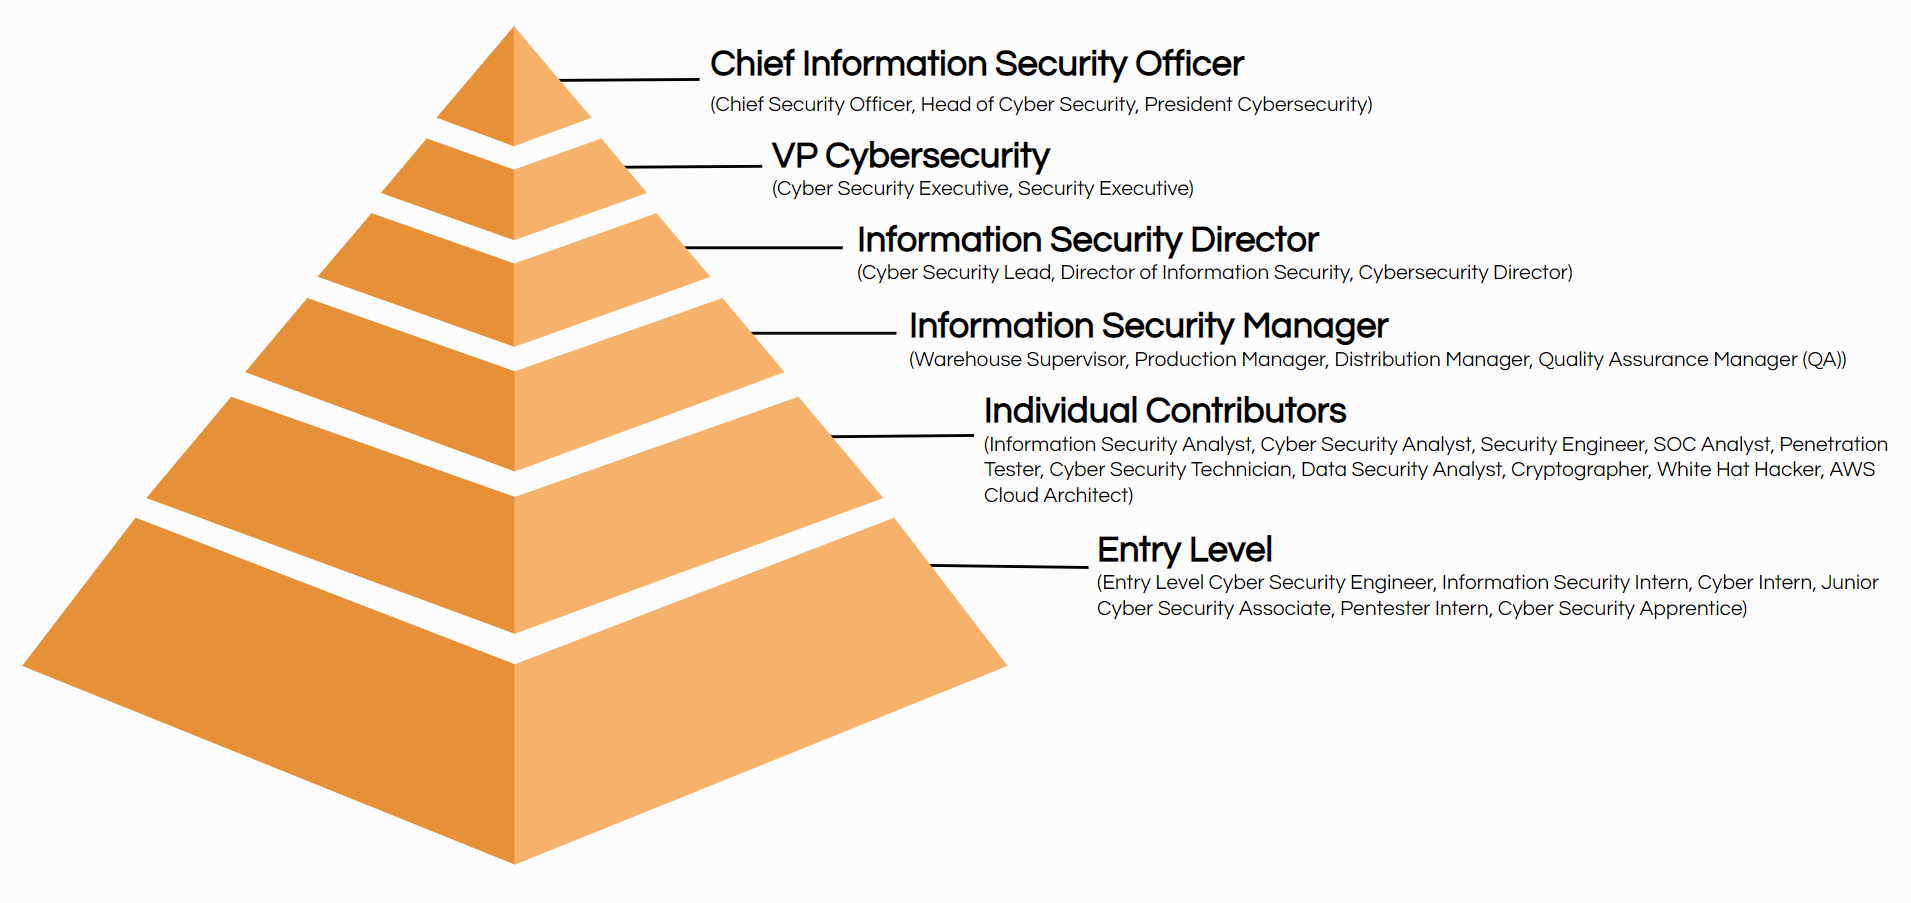 cybersecurity job titles hierarchy